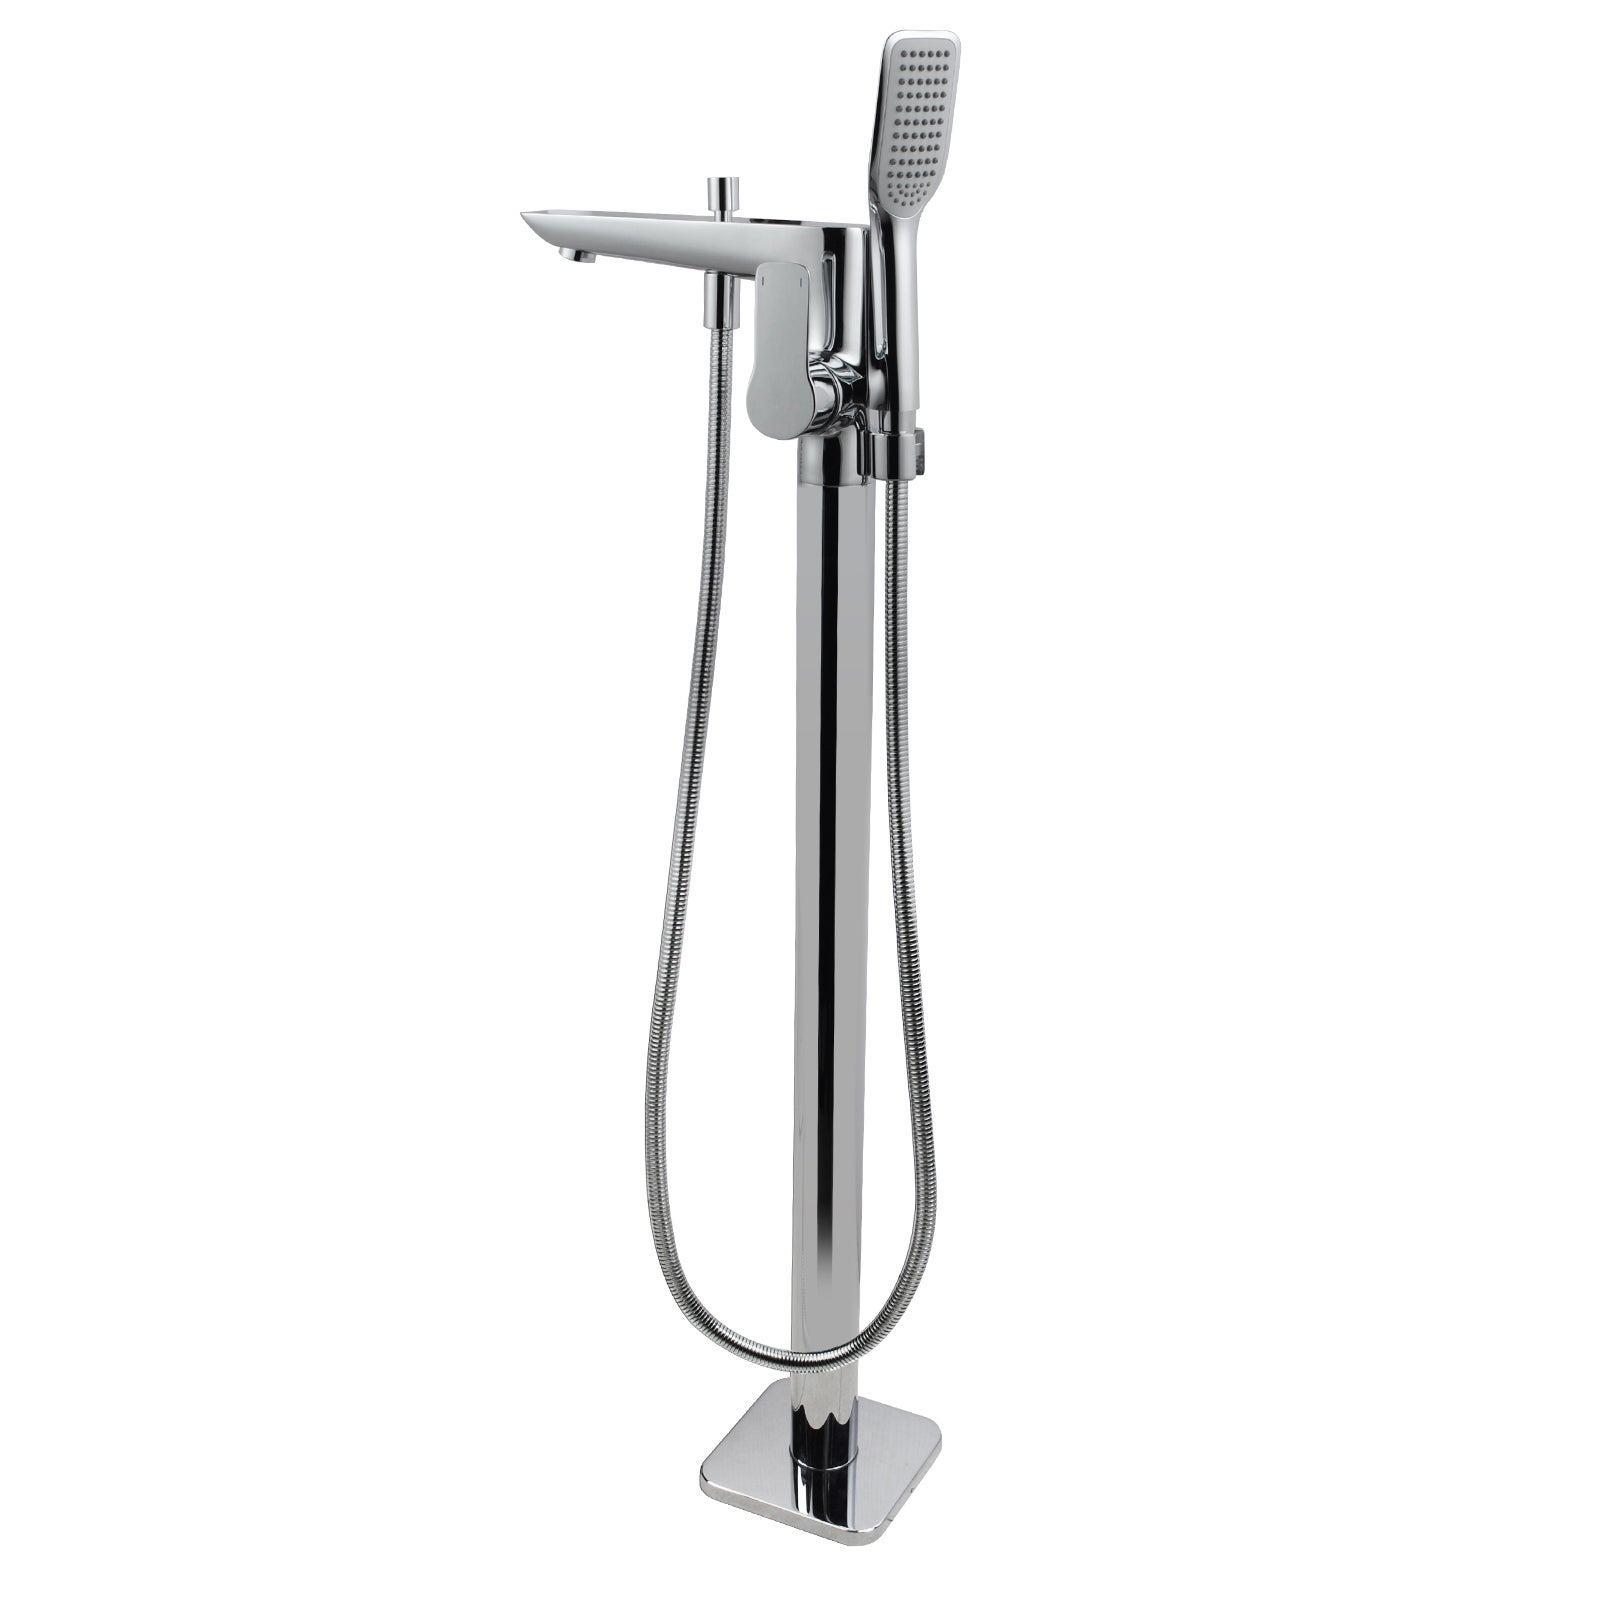 ACA Chrome Freestanding Bathtub Mixer with Handheld Shower Spout Floor Mounted